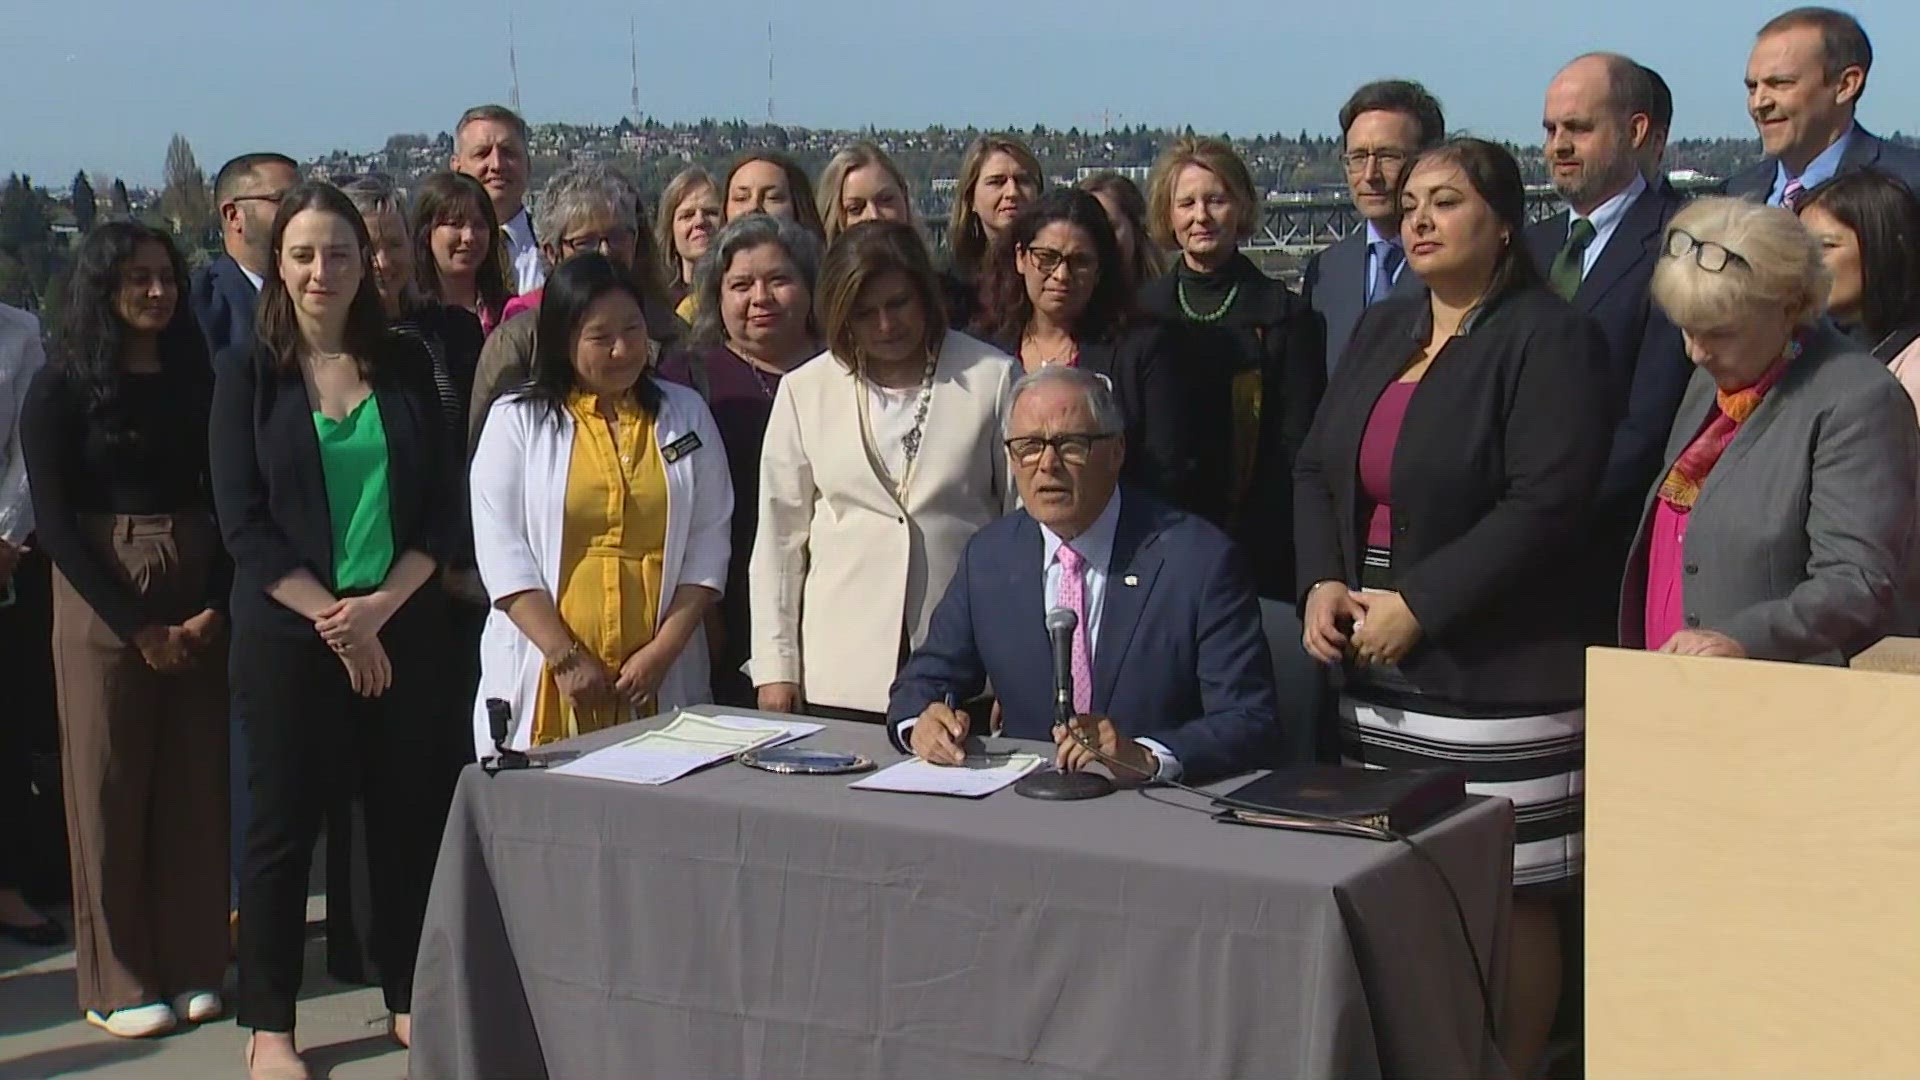 The Governor held a ceremony to sign 5 bills related to protecting access to abortion and reproductive care in Washington state